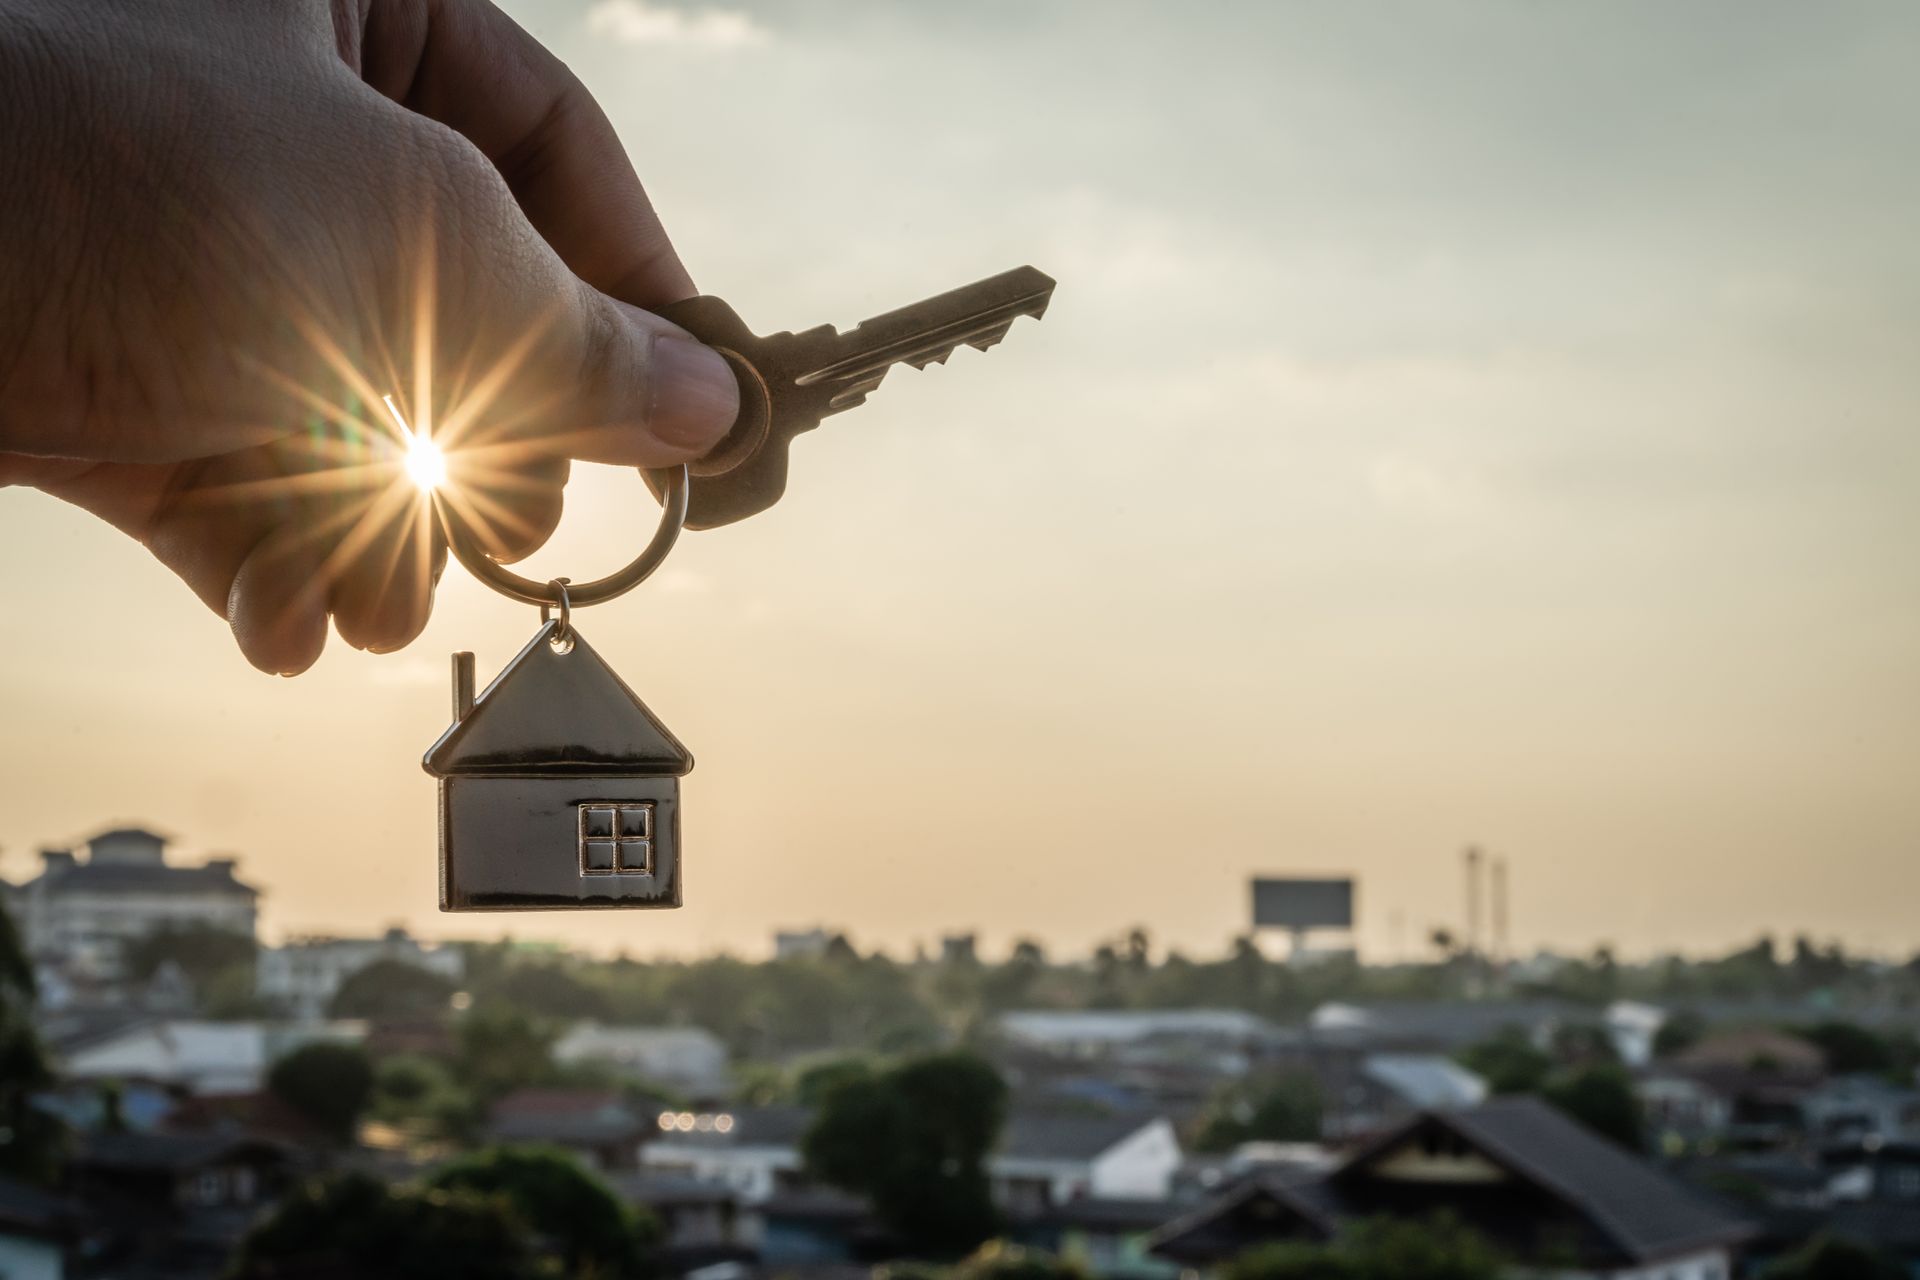 photo of a key being held up to the sky with homes in the background